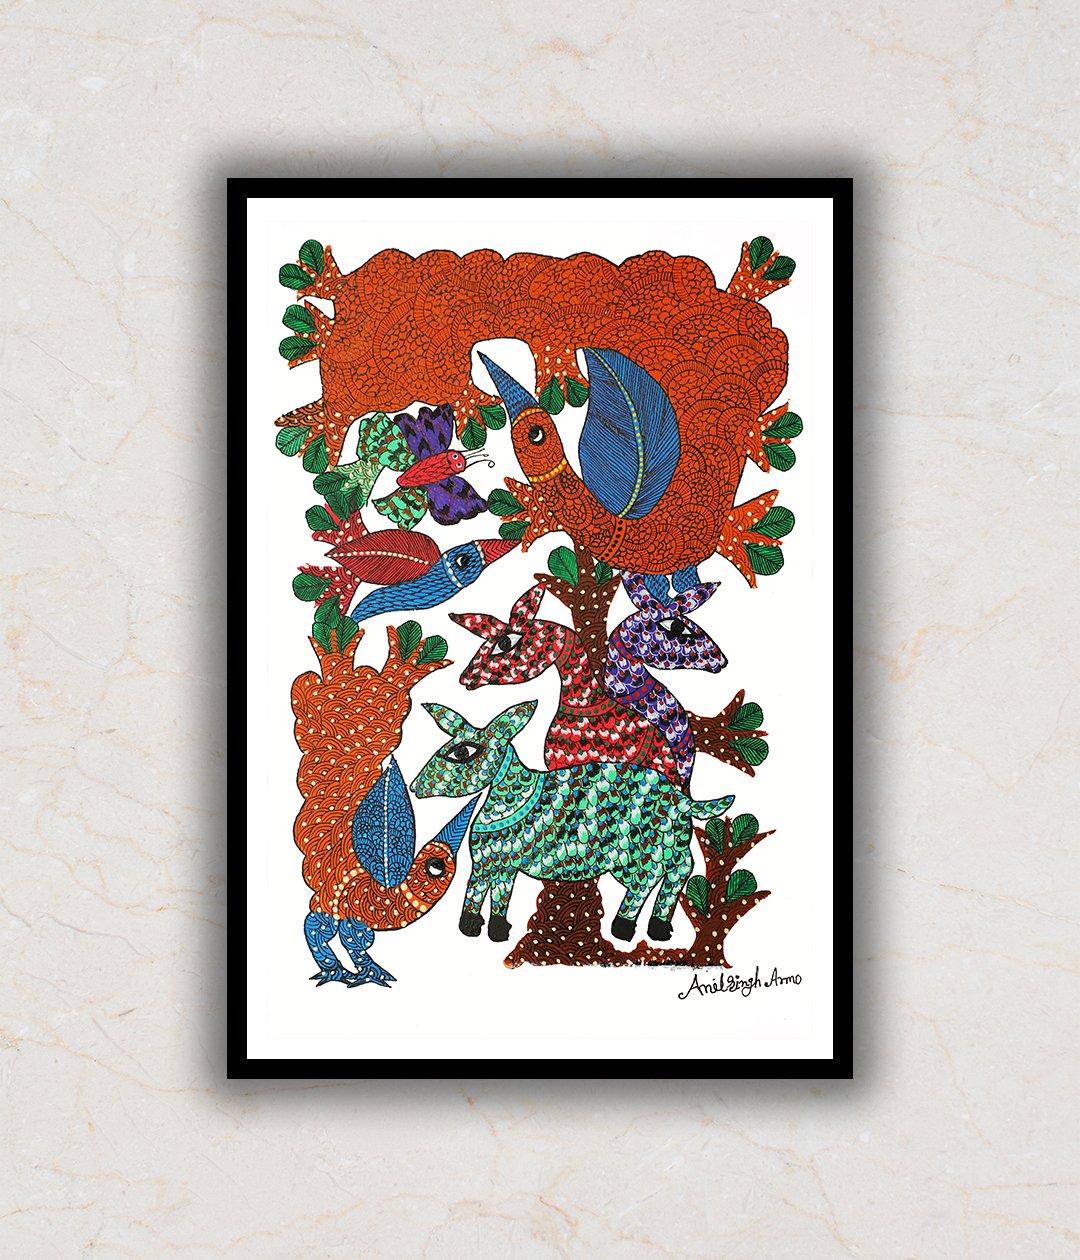 Jungle Gond Art Painting For Home Wall Art Decor